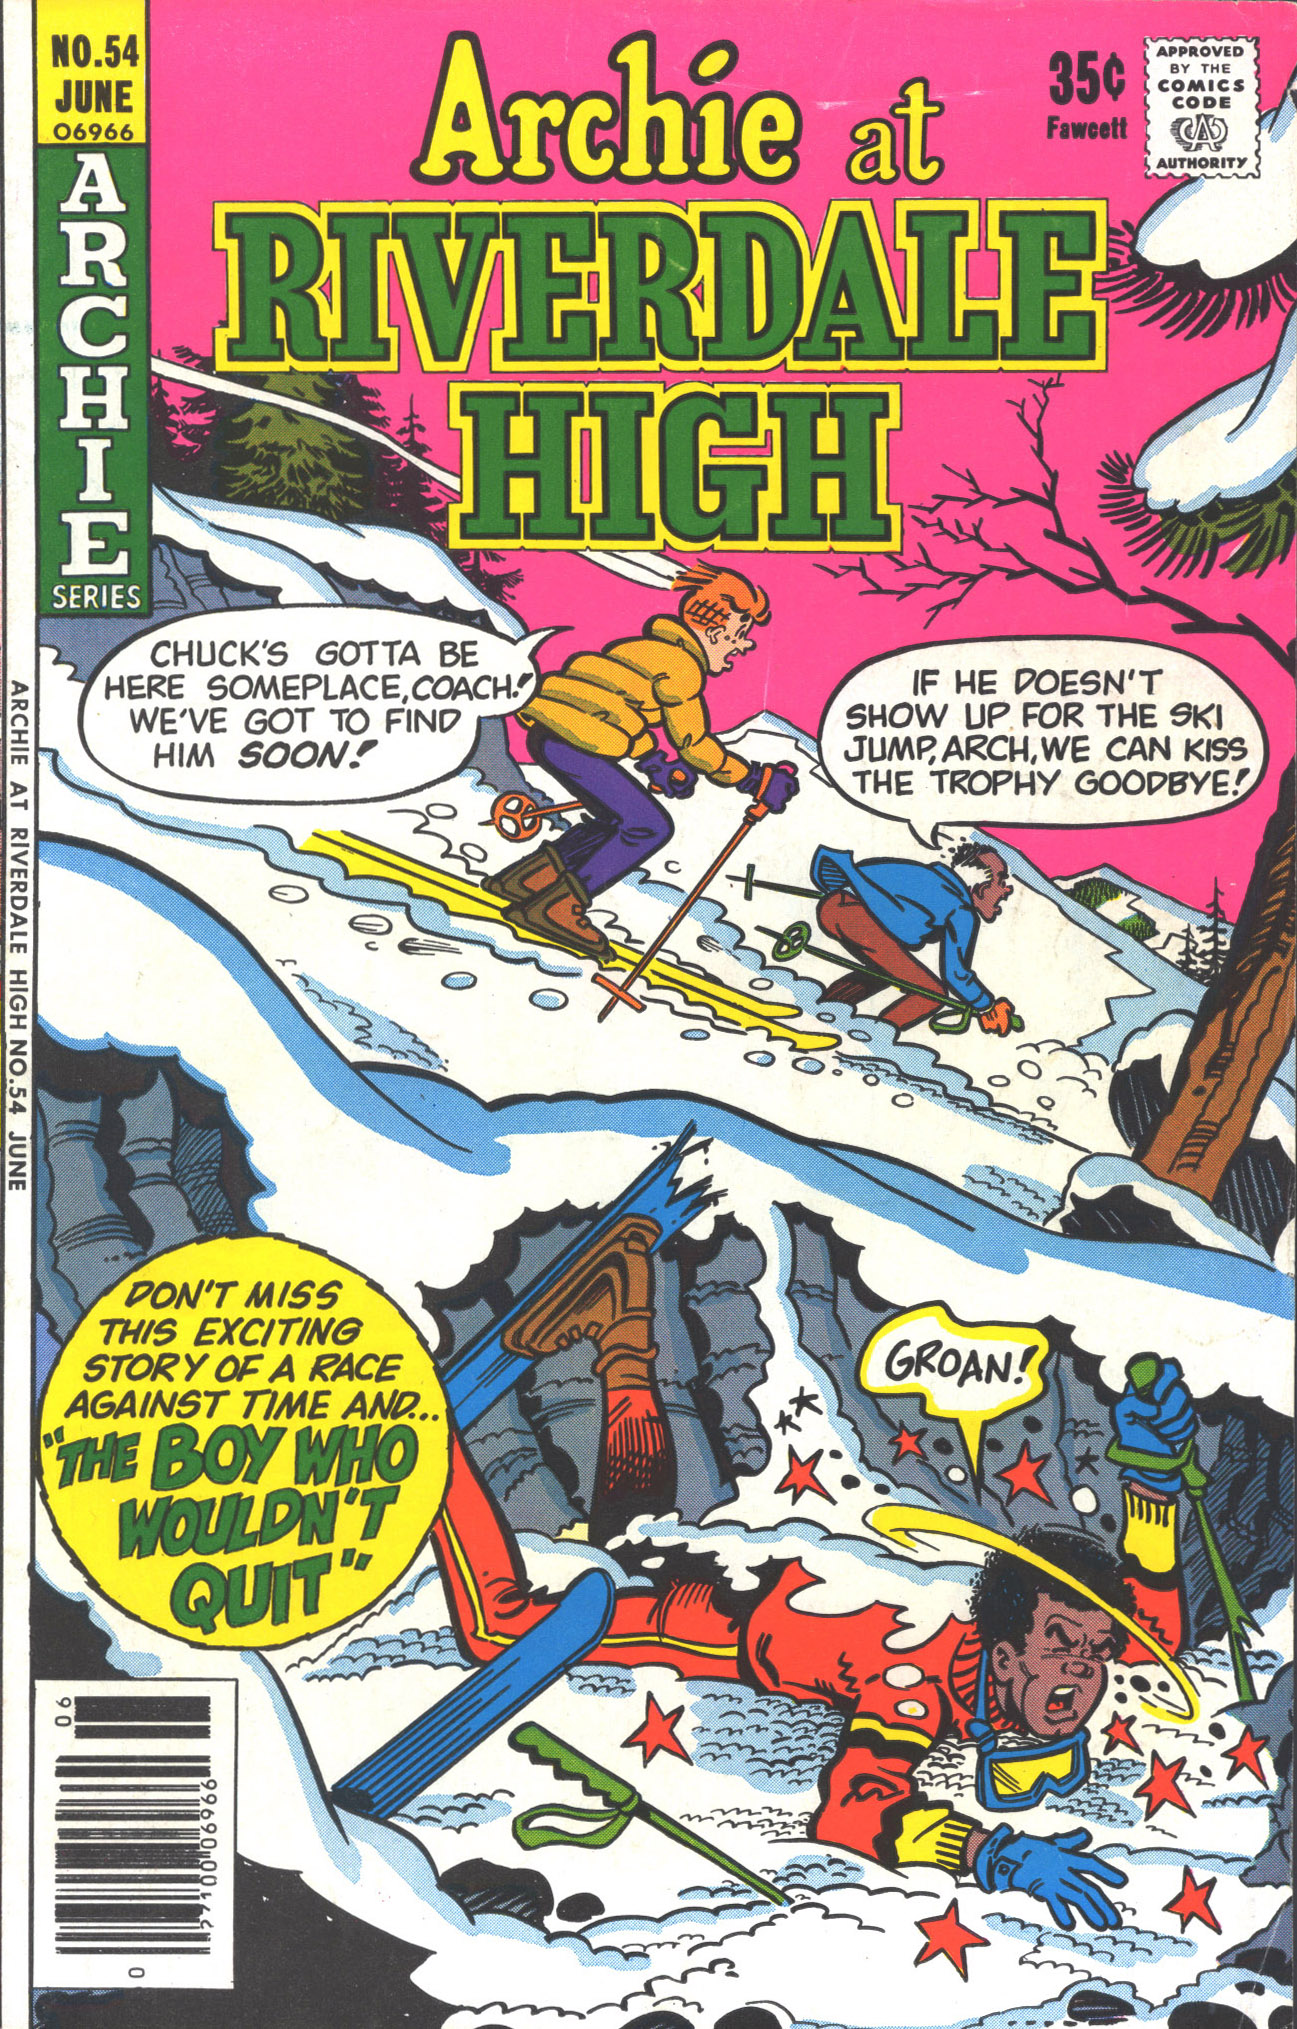 Read online Archie at Riverdale High (1972) comic -  Issue #54 - 1